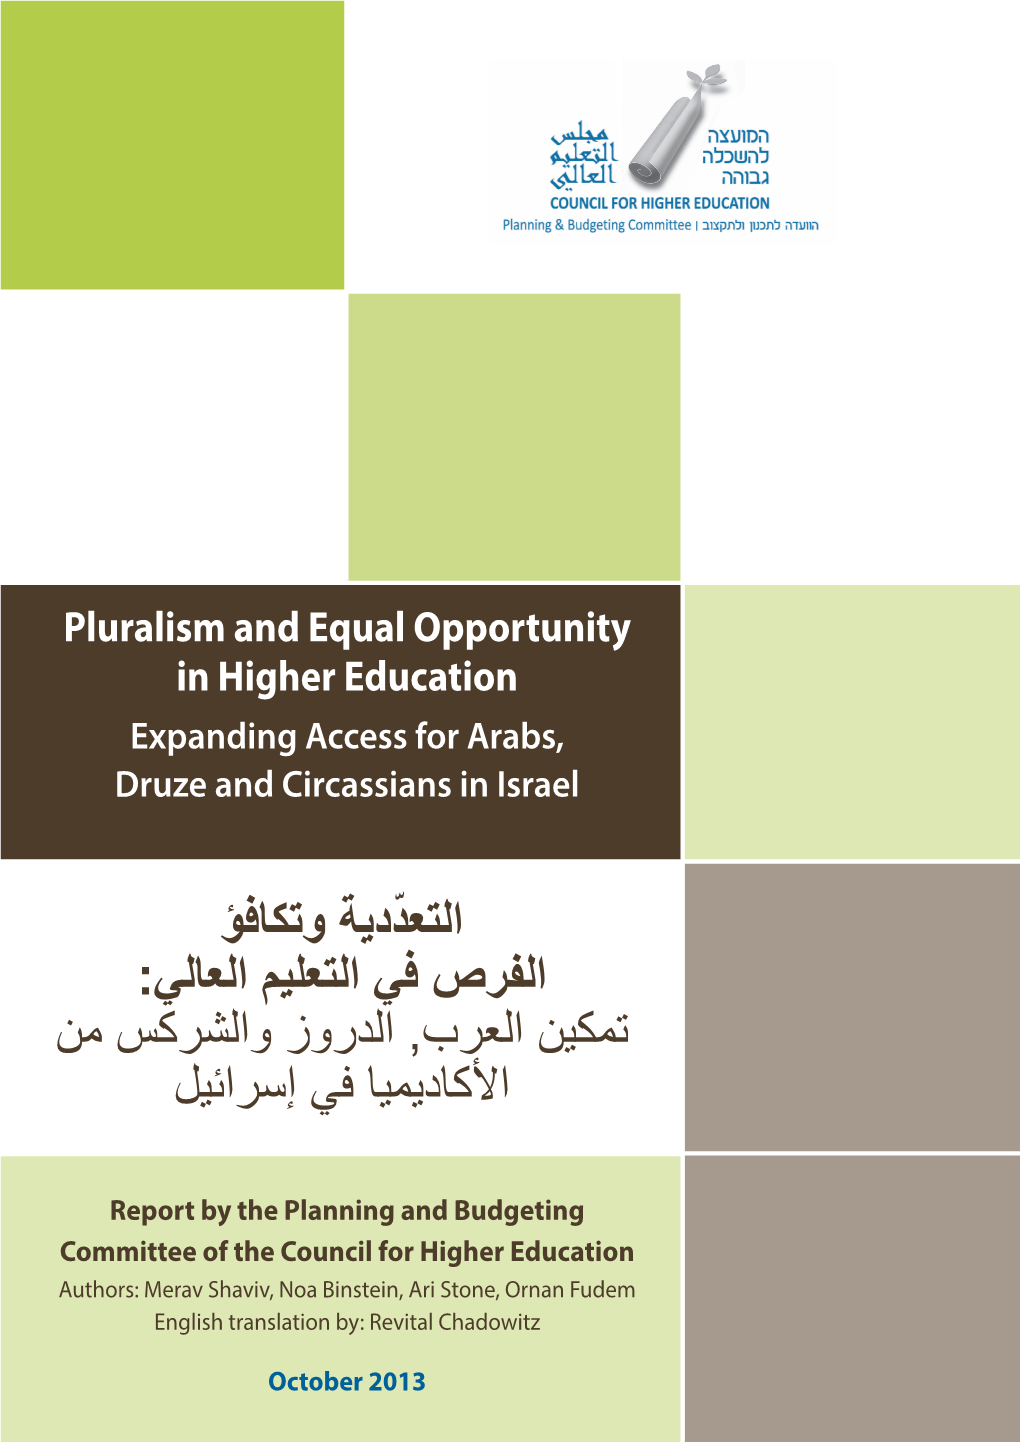 Pluralism and Equal Opportunity in Higher Education Expanding Access for Arabs, Druze and Circassians in Israel